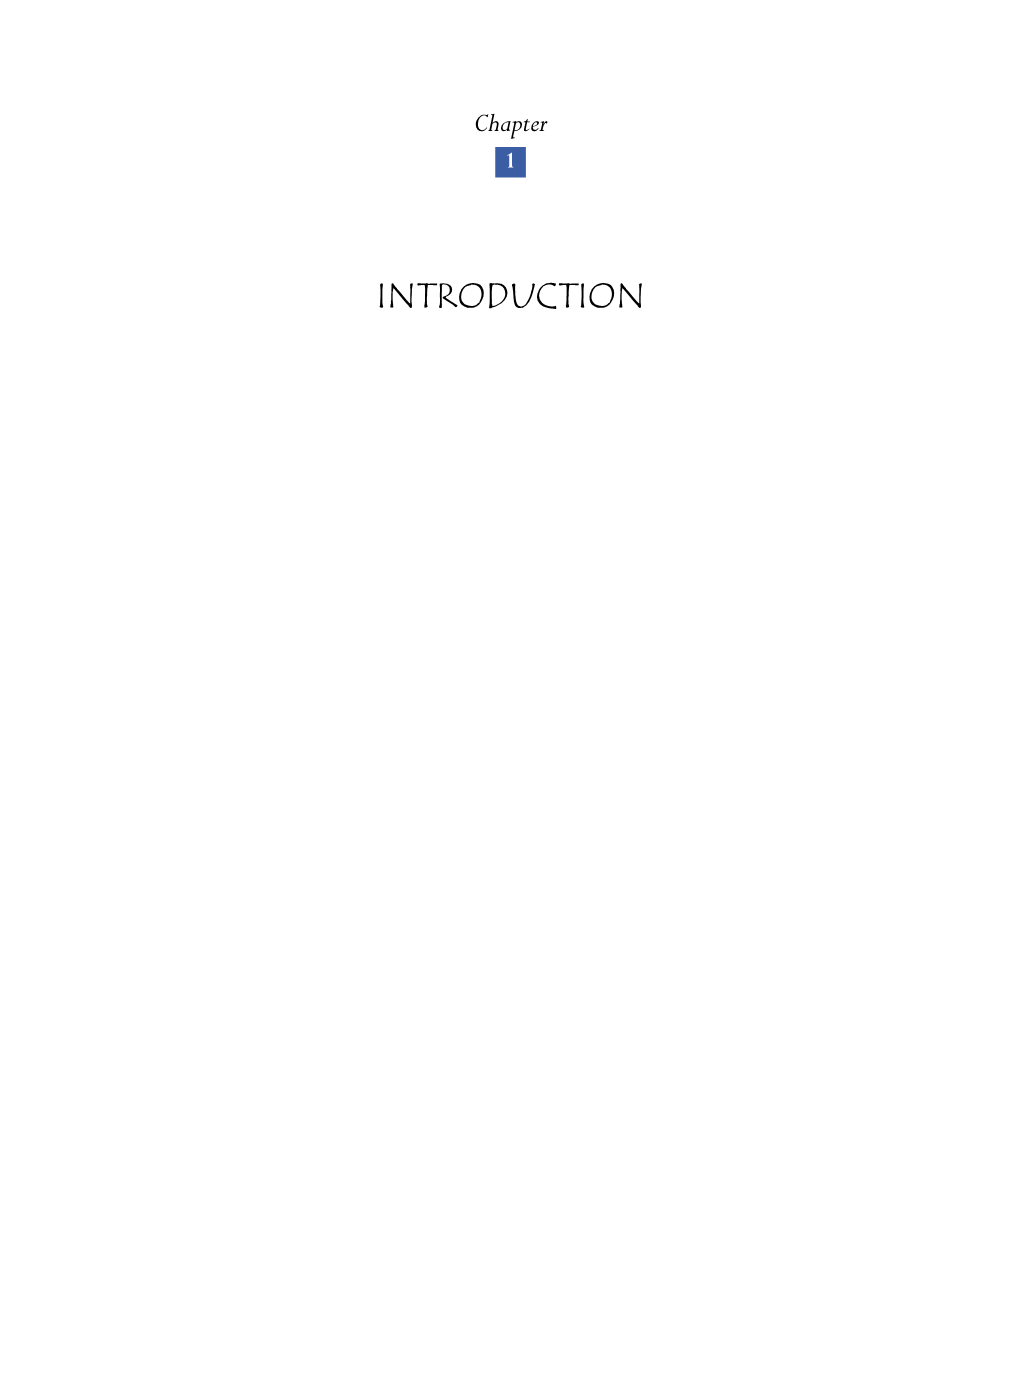 INTRODUCTION Introduction CHAPTER 1